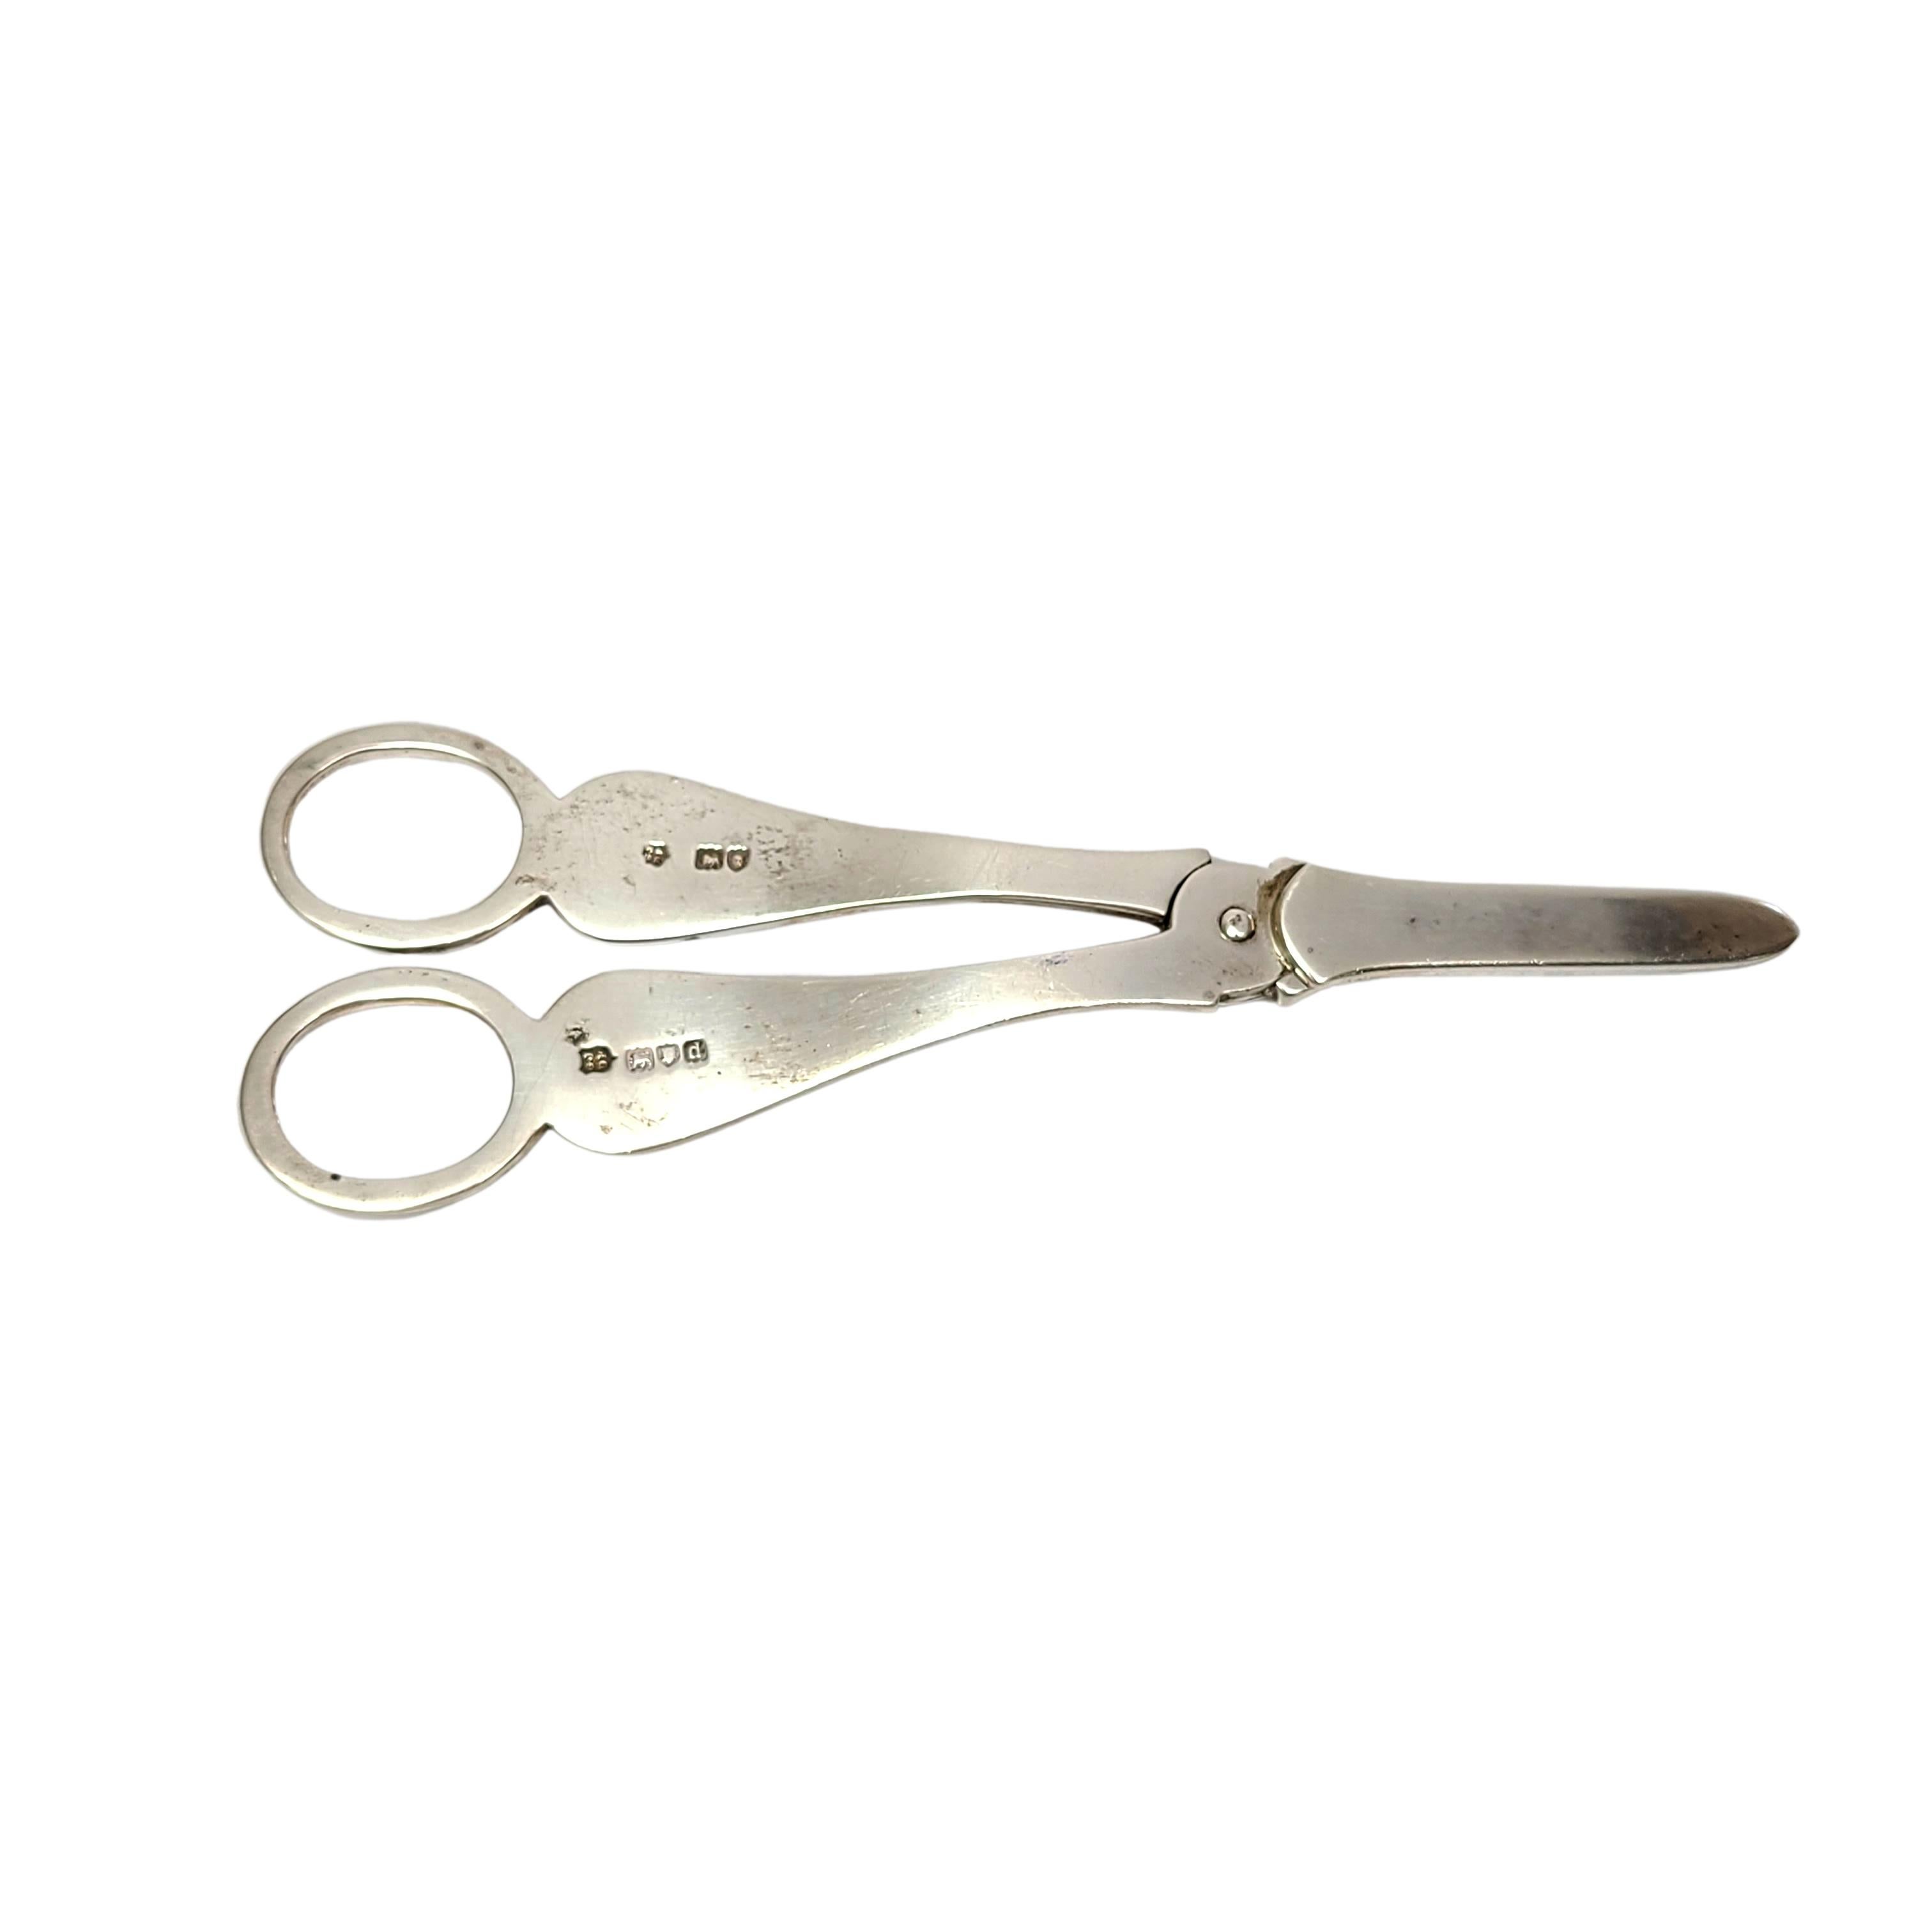 Sterling silver grape shears/scissors by George Jackson and David Fullerton of London, circa 1899.

Monograms appear to be THJ and 1900.

Features a bright cut etched design on one side, polished smooth rear side. Monograms are on oval cartouches,